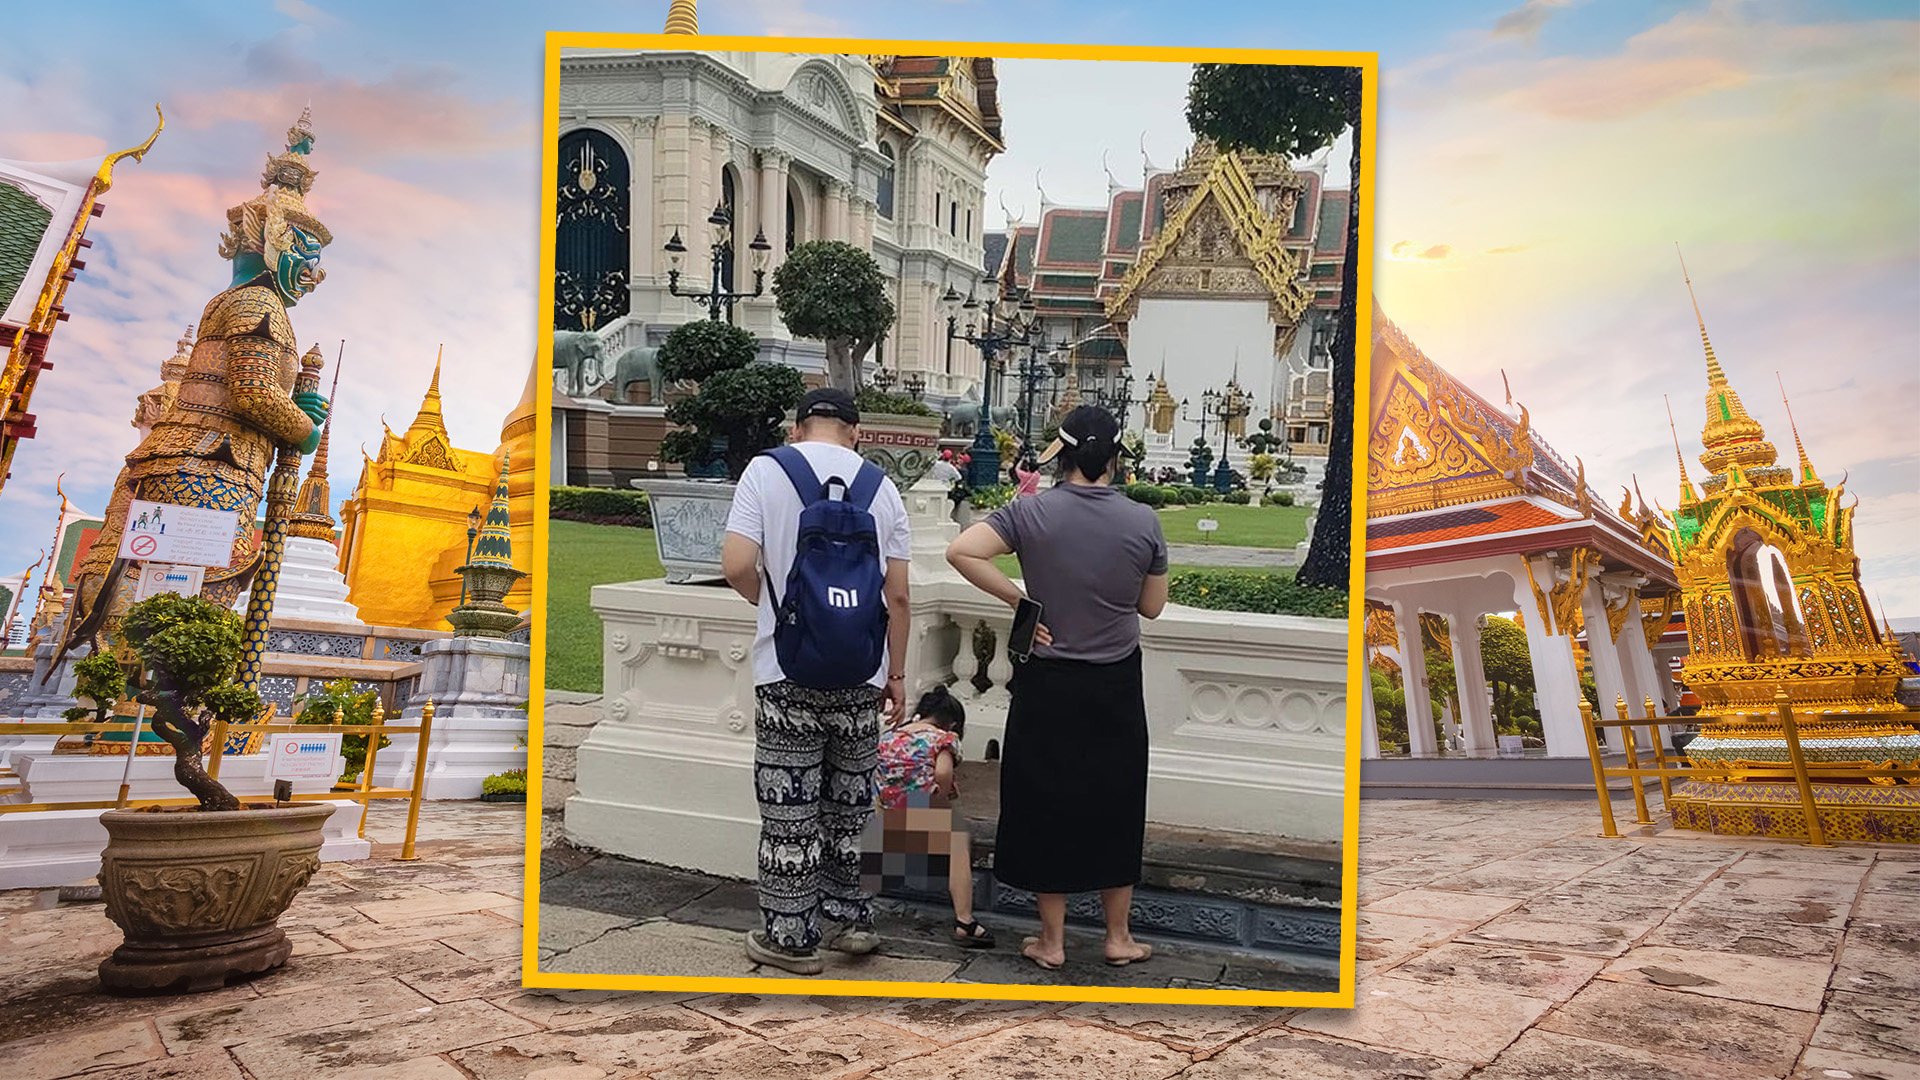 A couple from China who allowed their daughter to pee near a sacred site in Thailand have sparked anger and a debate over the behaviour of mainland tourists overseas. Photo: SCMP composite/Shutterstock/QQ.com